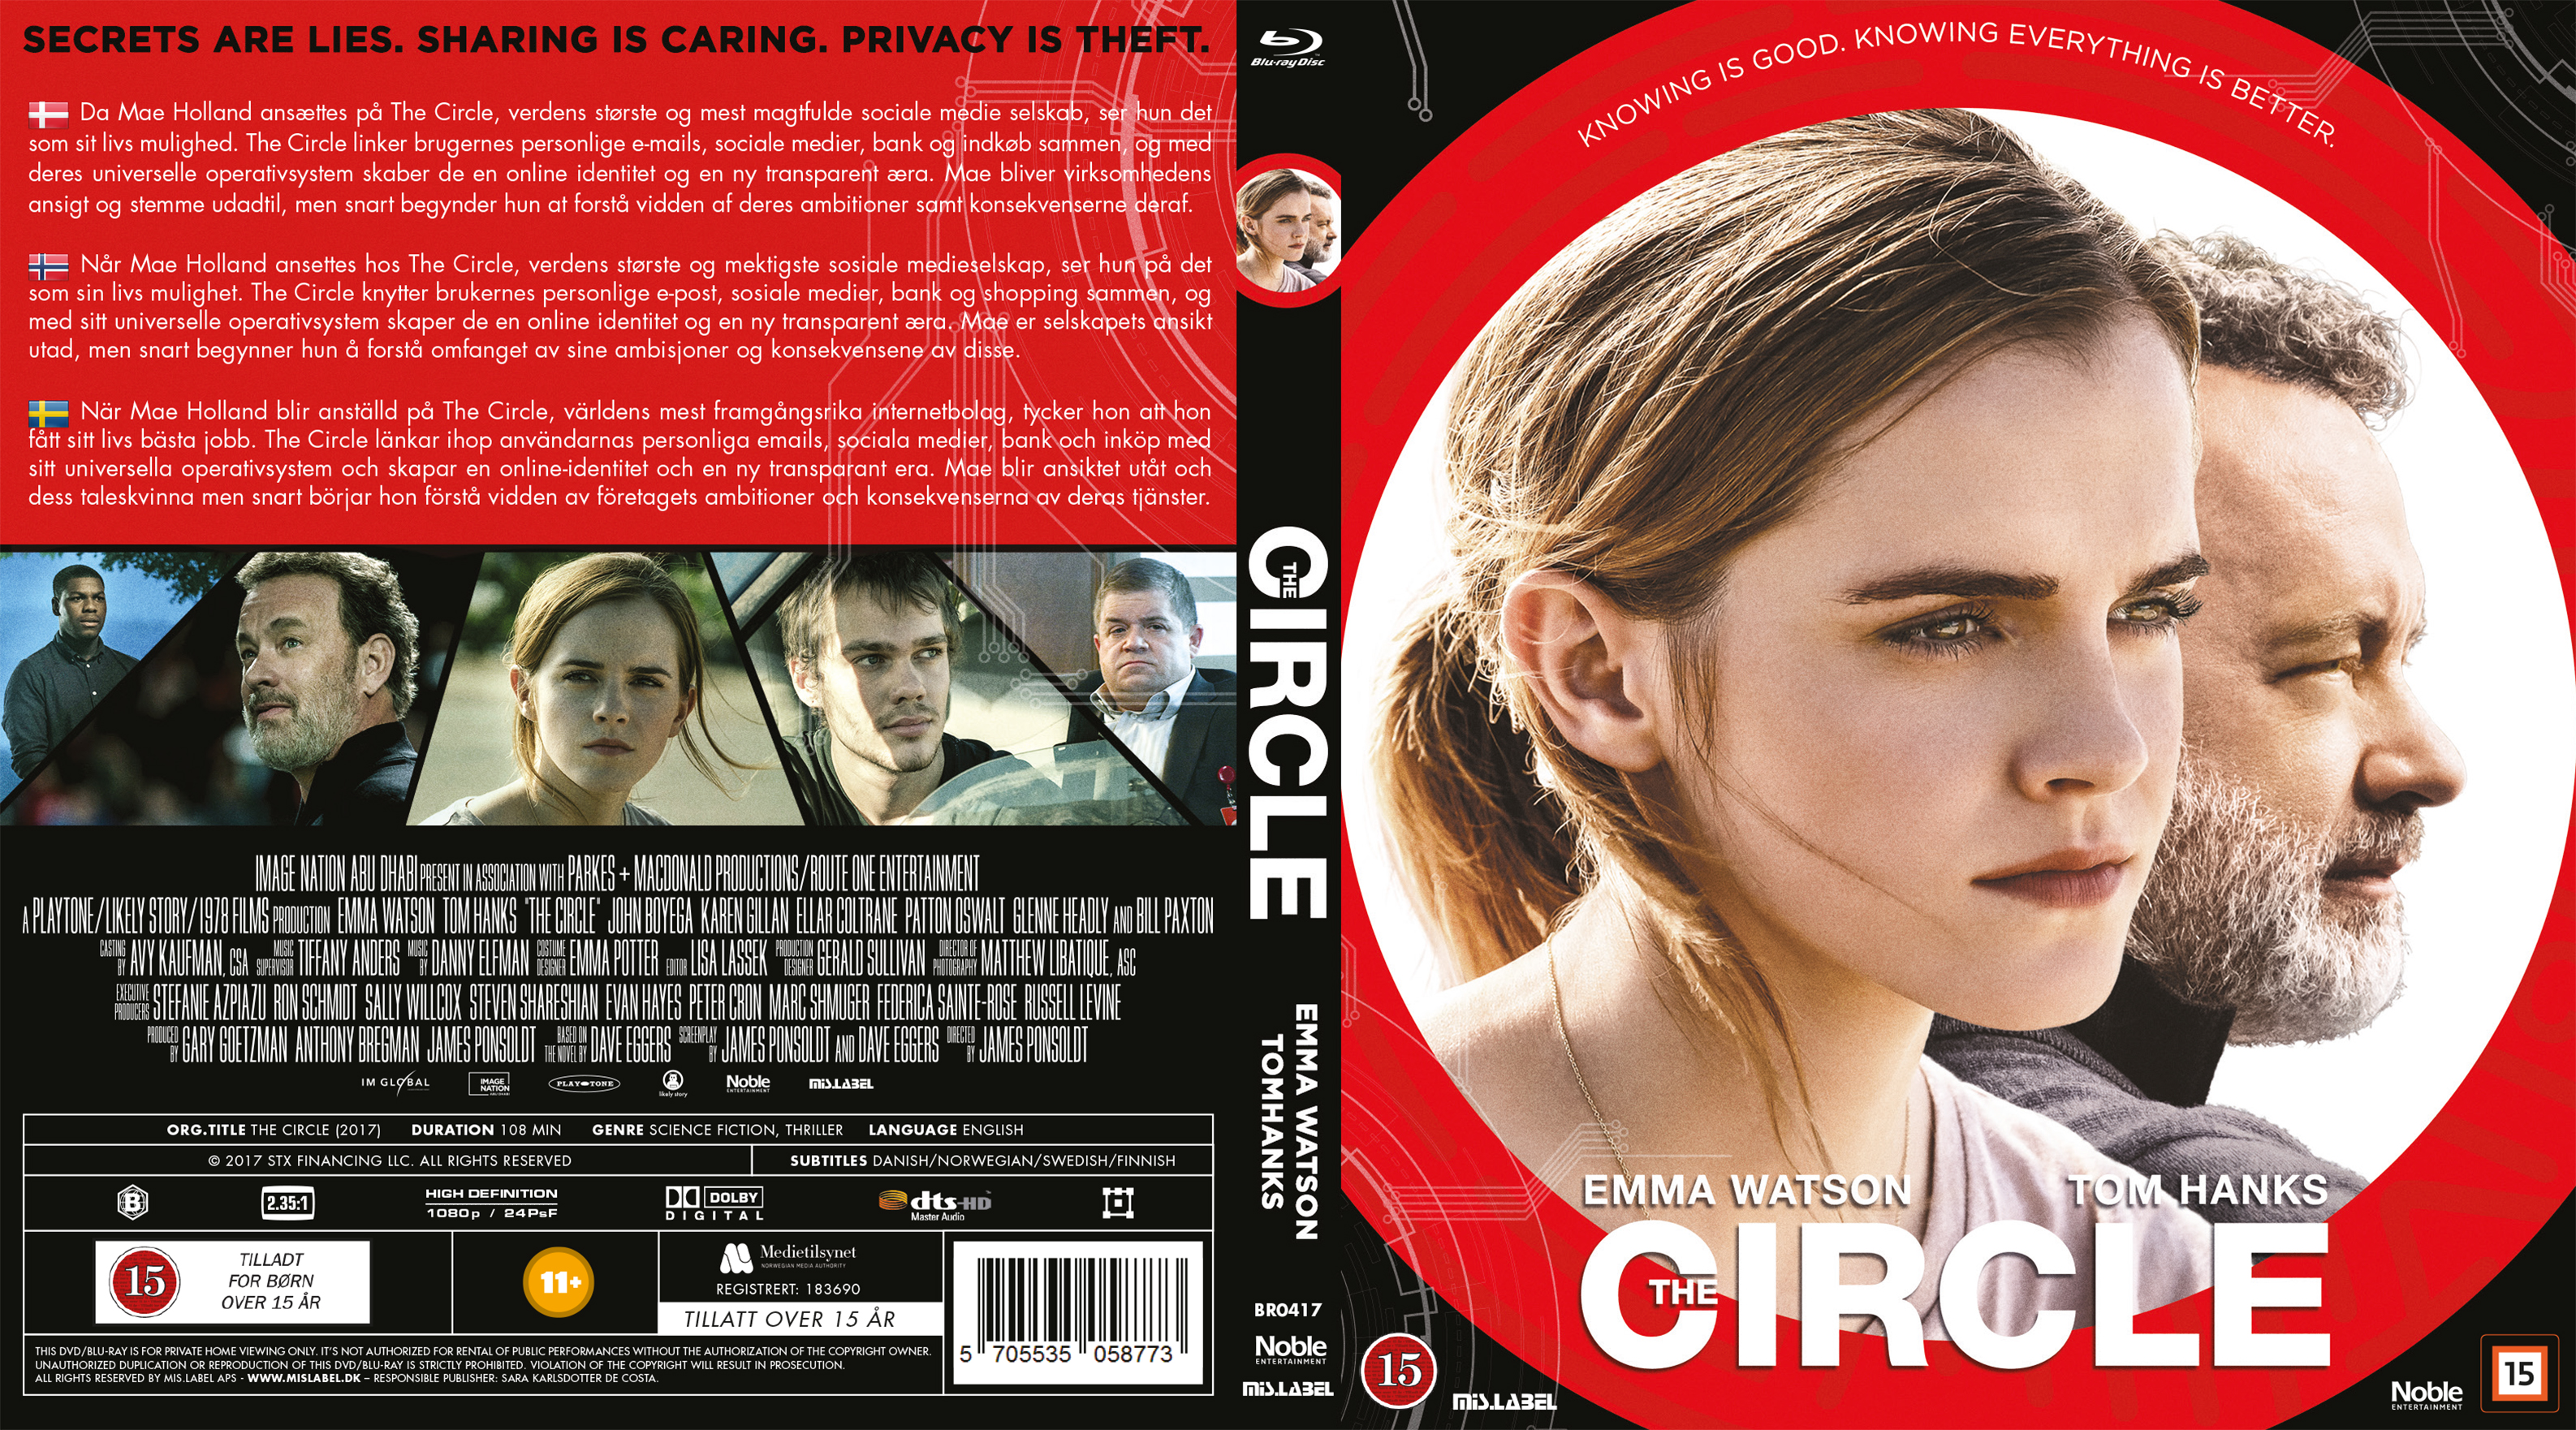 The Circle 2017 Full Movie Online In Hd Quality